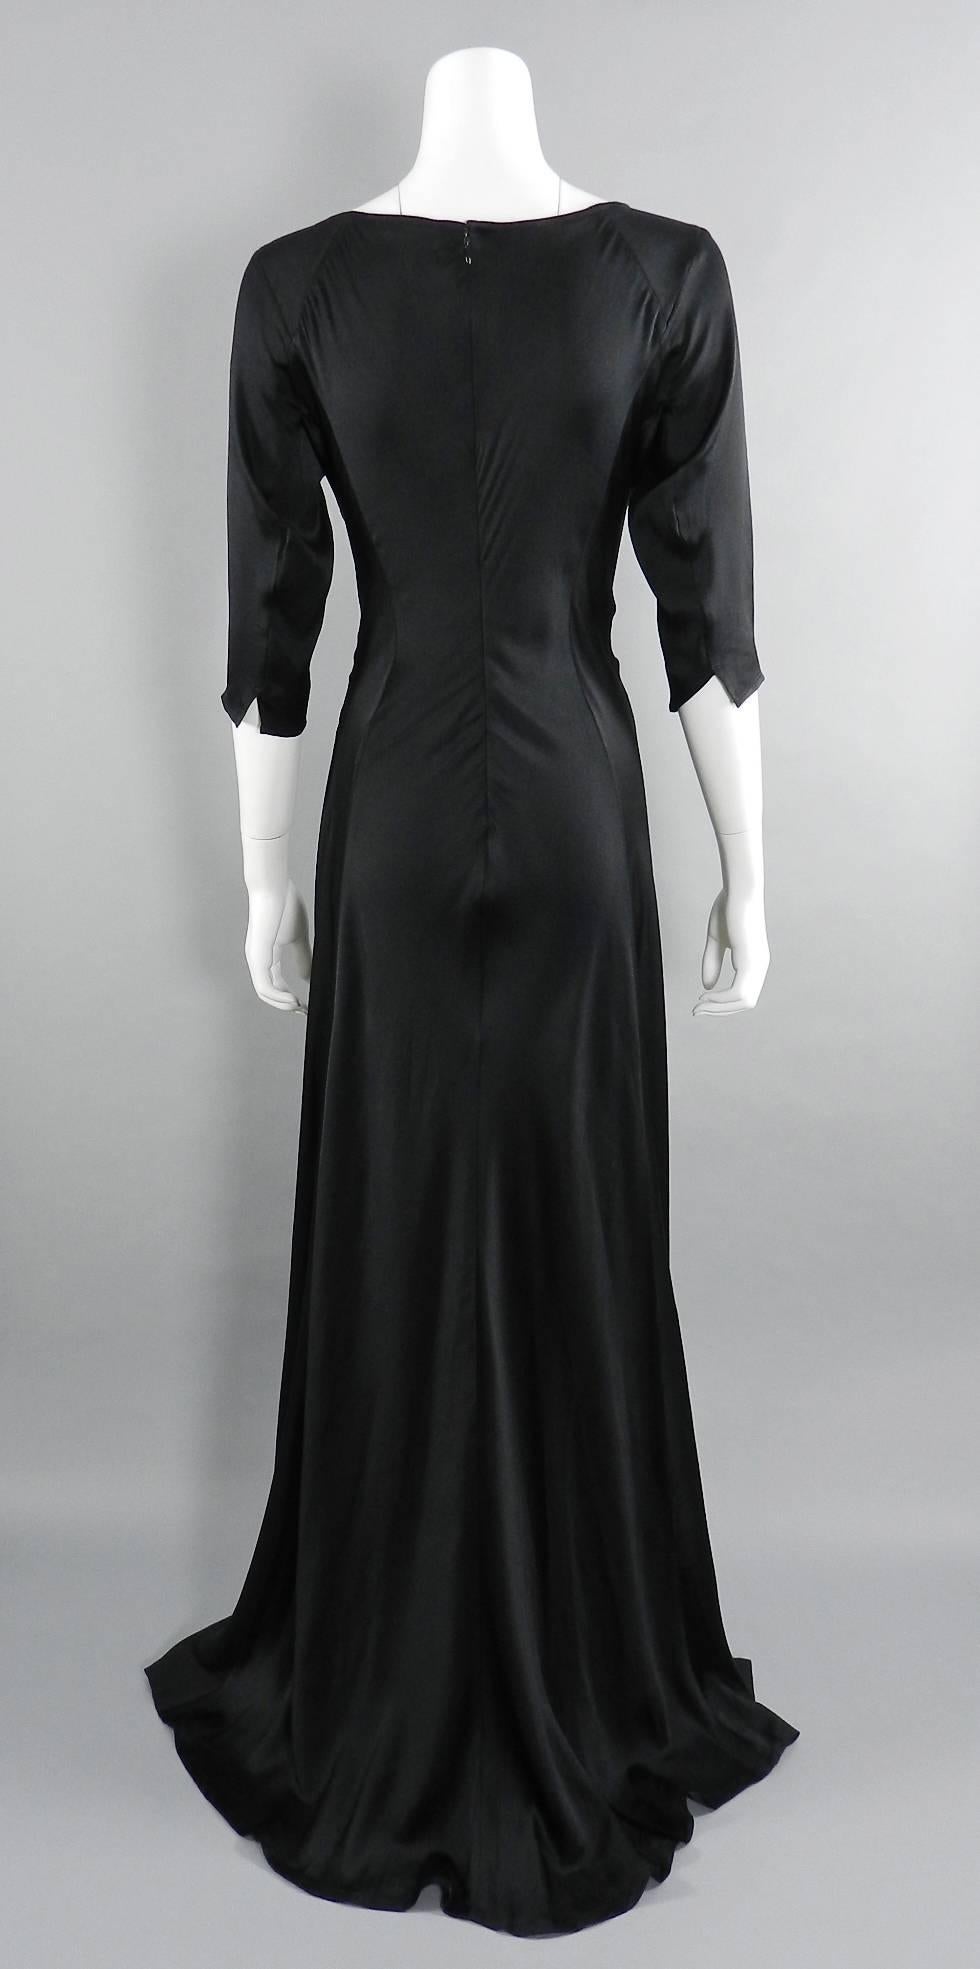 Yohji Yamamoto Long Black Silk Satin Gown with train.  Scoop neckline, 3/4 length sleeves, centre back zipper. 100% silk. Tagged size Yohji 3 (about USA 8). Garment bust to fit 34/35